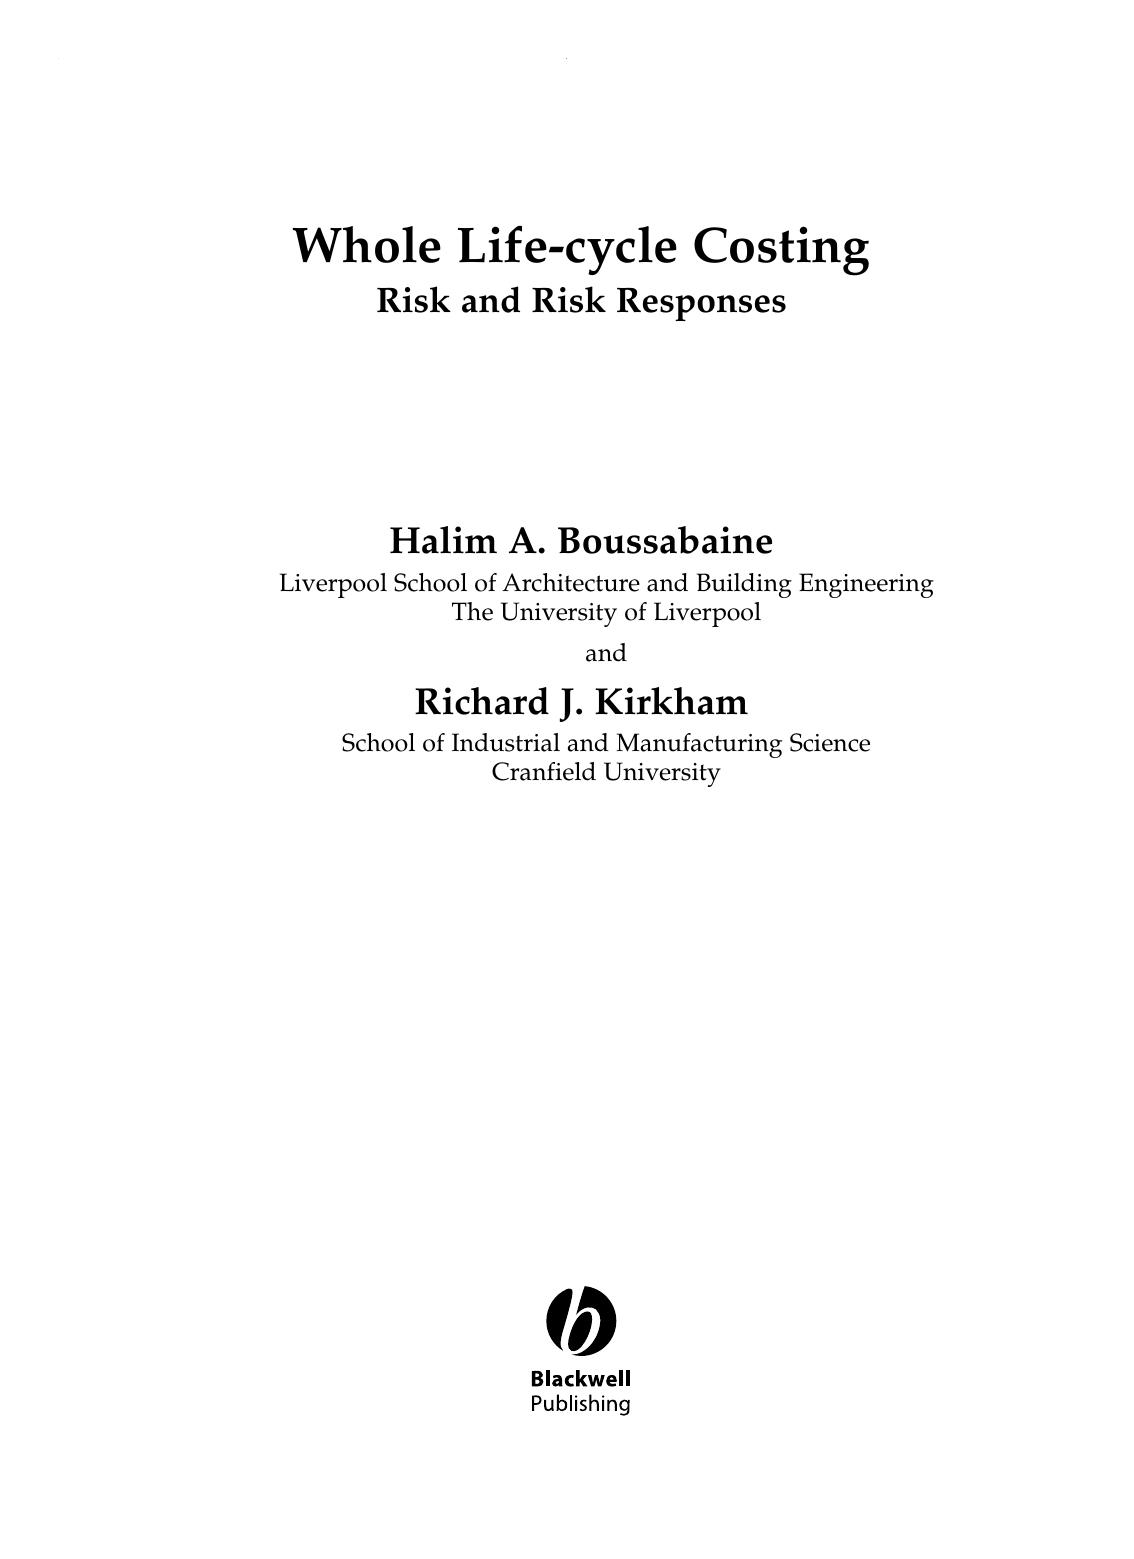 Whole Life Cycle Costing  Risk and Risk Responses 2004